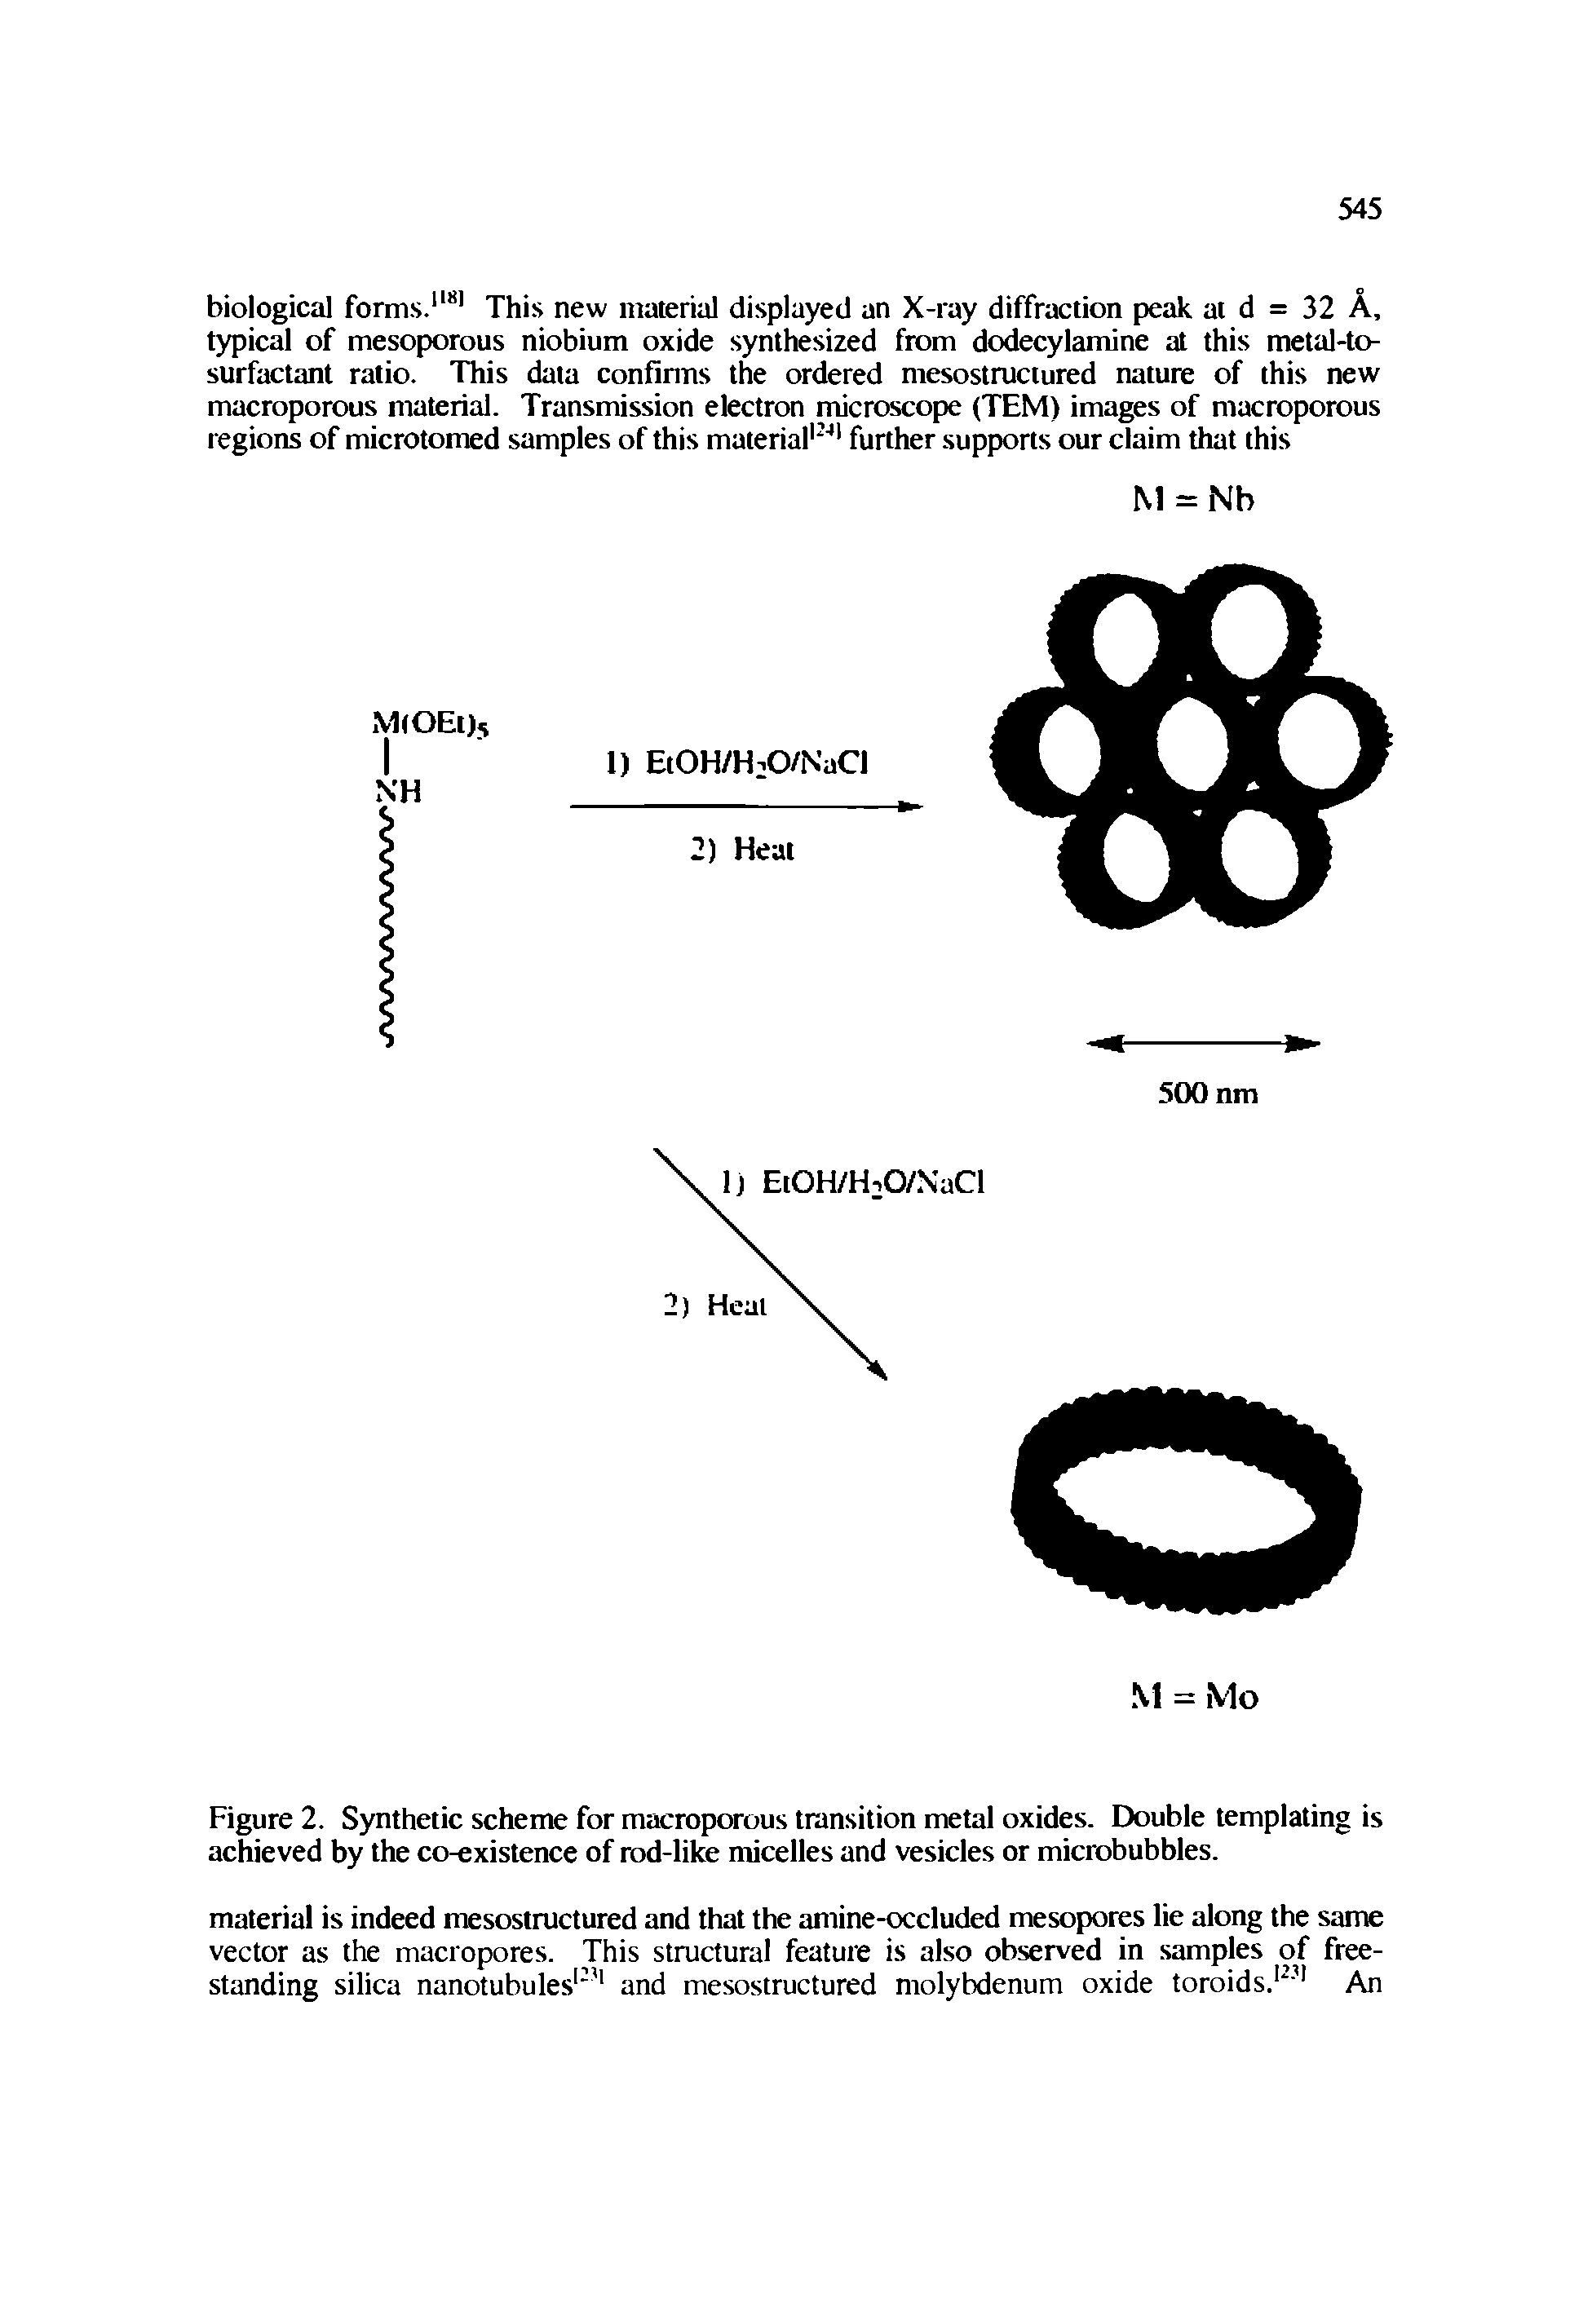 Figure 2. Synthetic scheme for macroporous transition metal oxides. Double templating is achieved by the co-existence of rod-like micelles and vesicles or microbubbles.